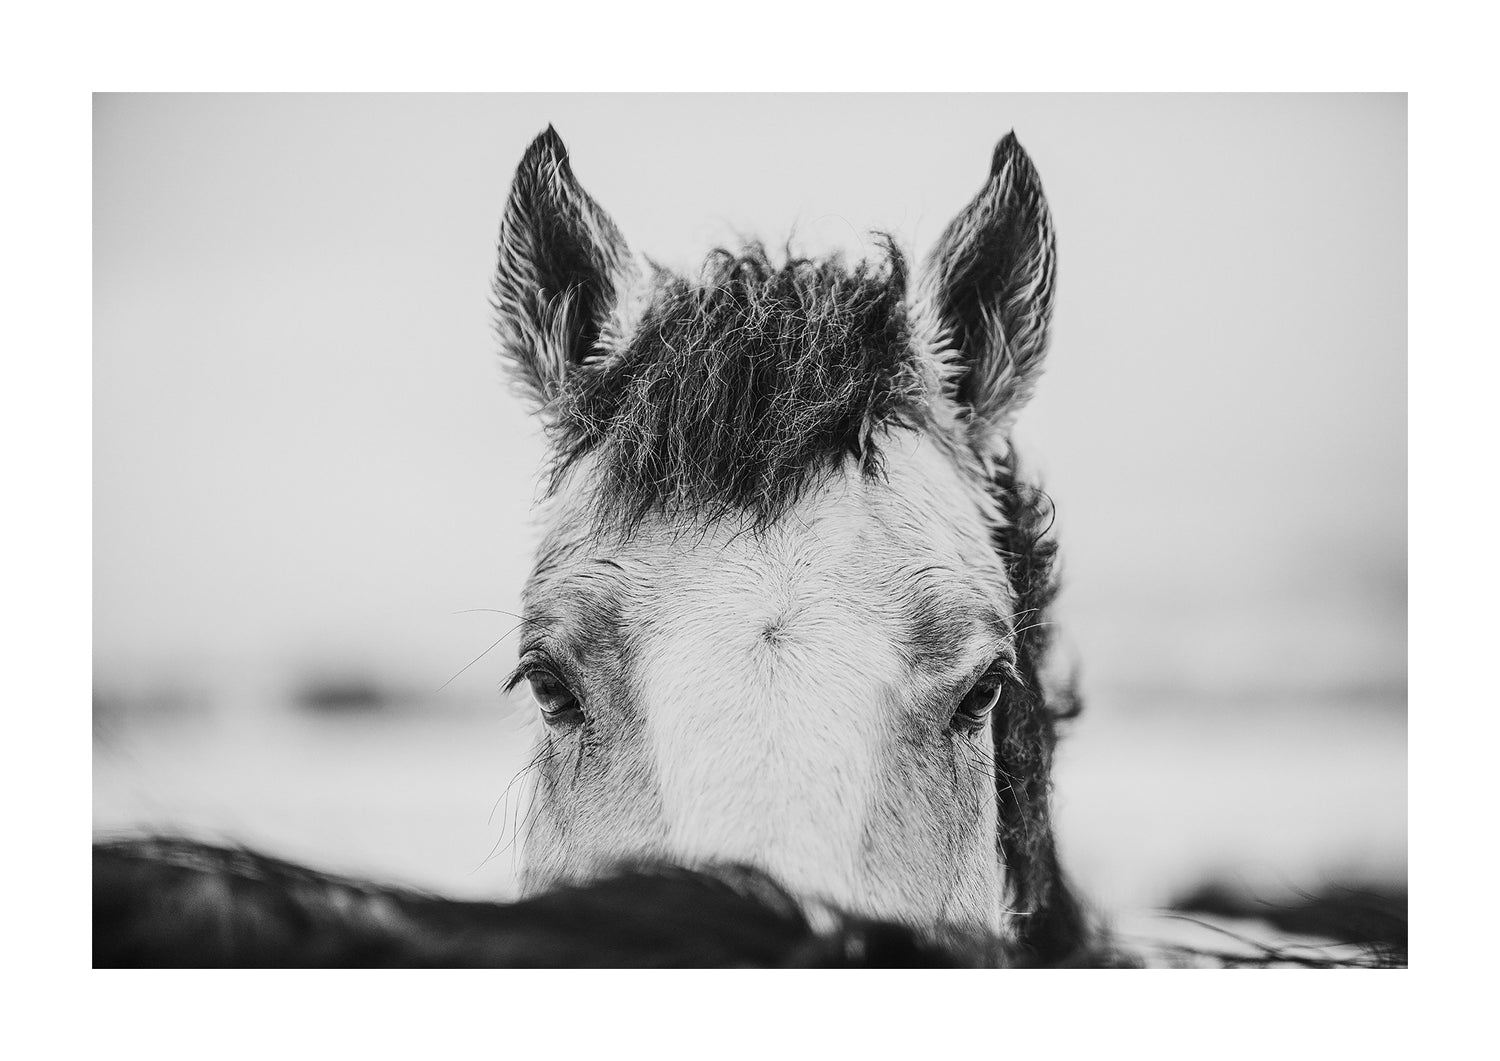 "Bed Head" Black and white photograph of a horse head